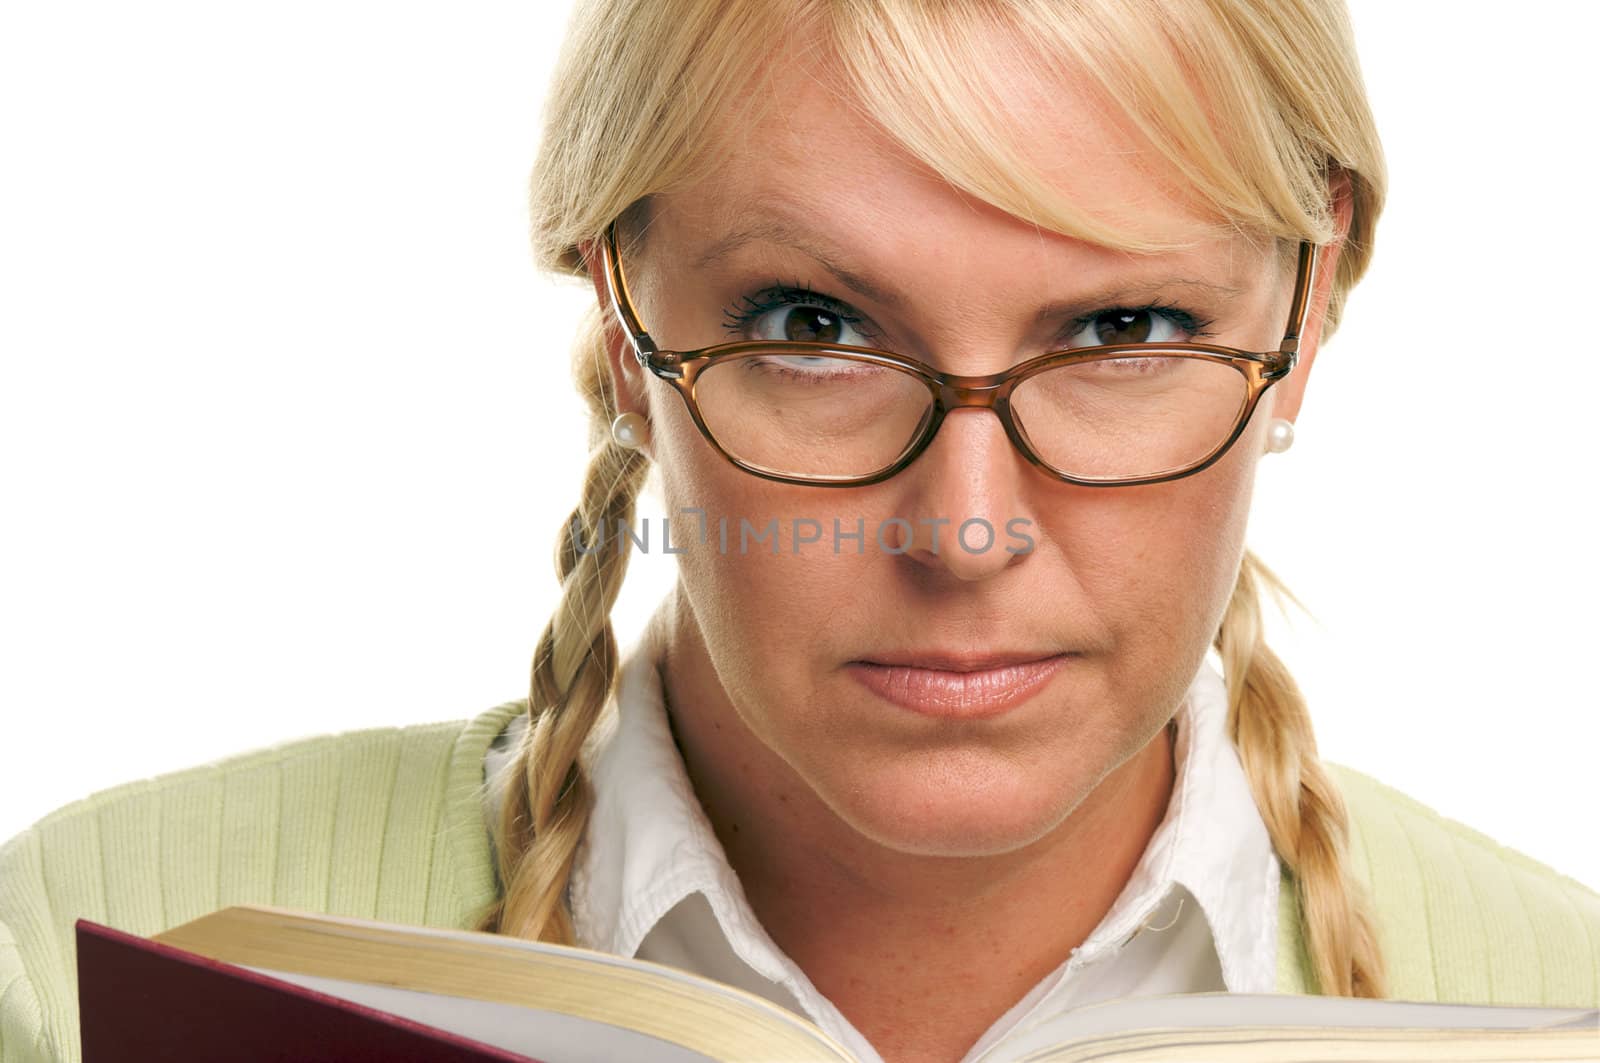 Serious Female with Ponytails and Book isolated on a White Background.